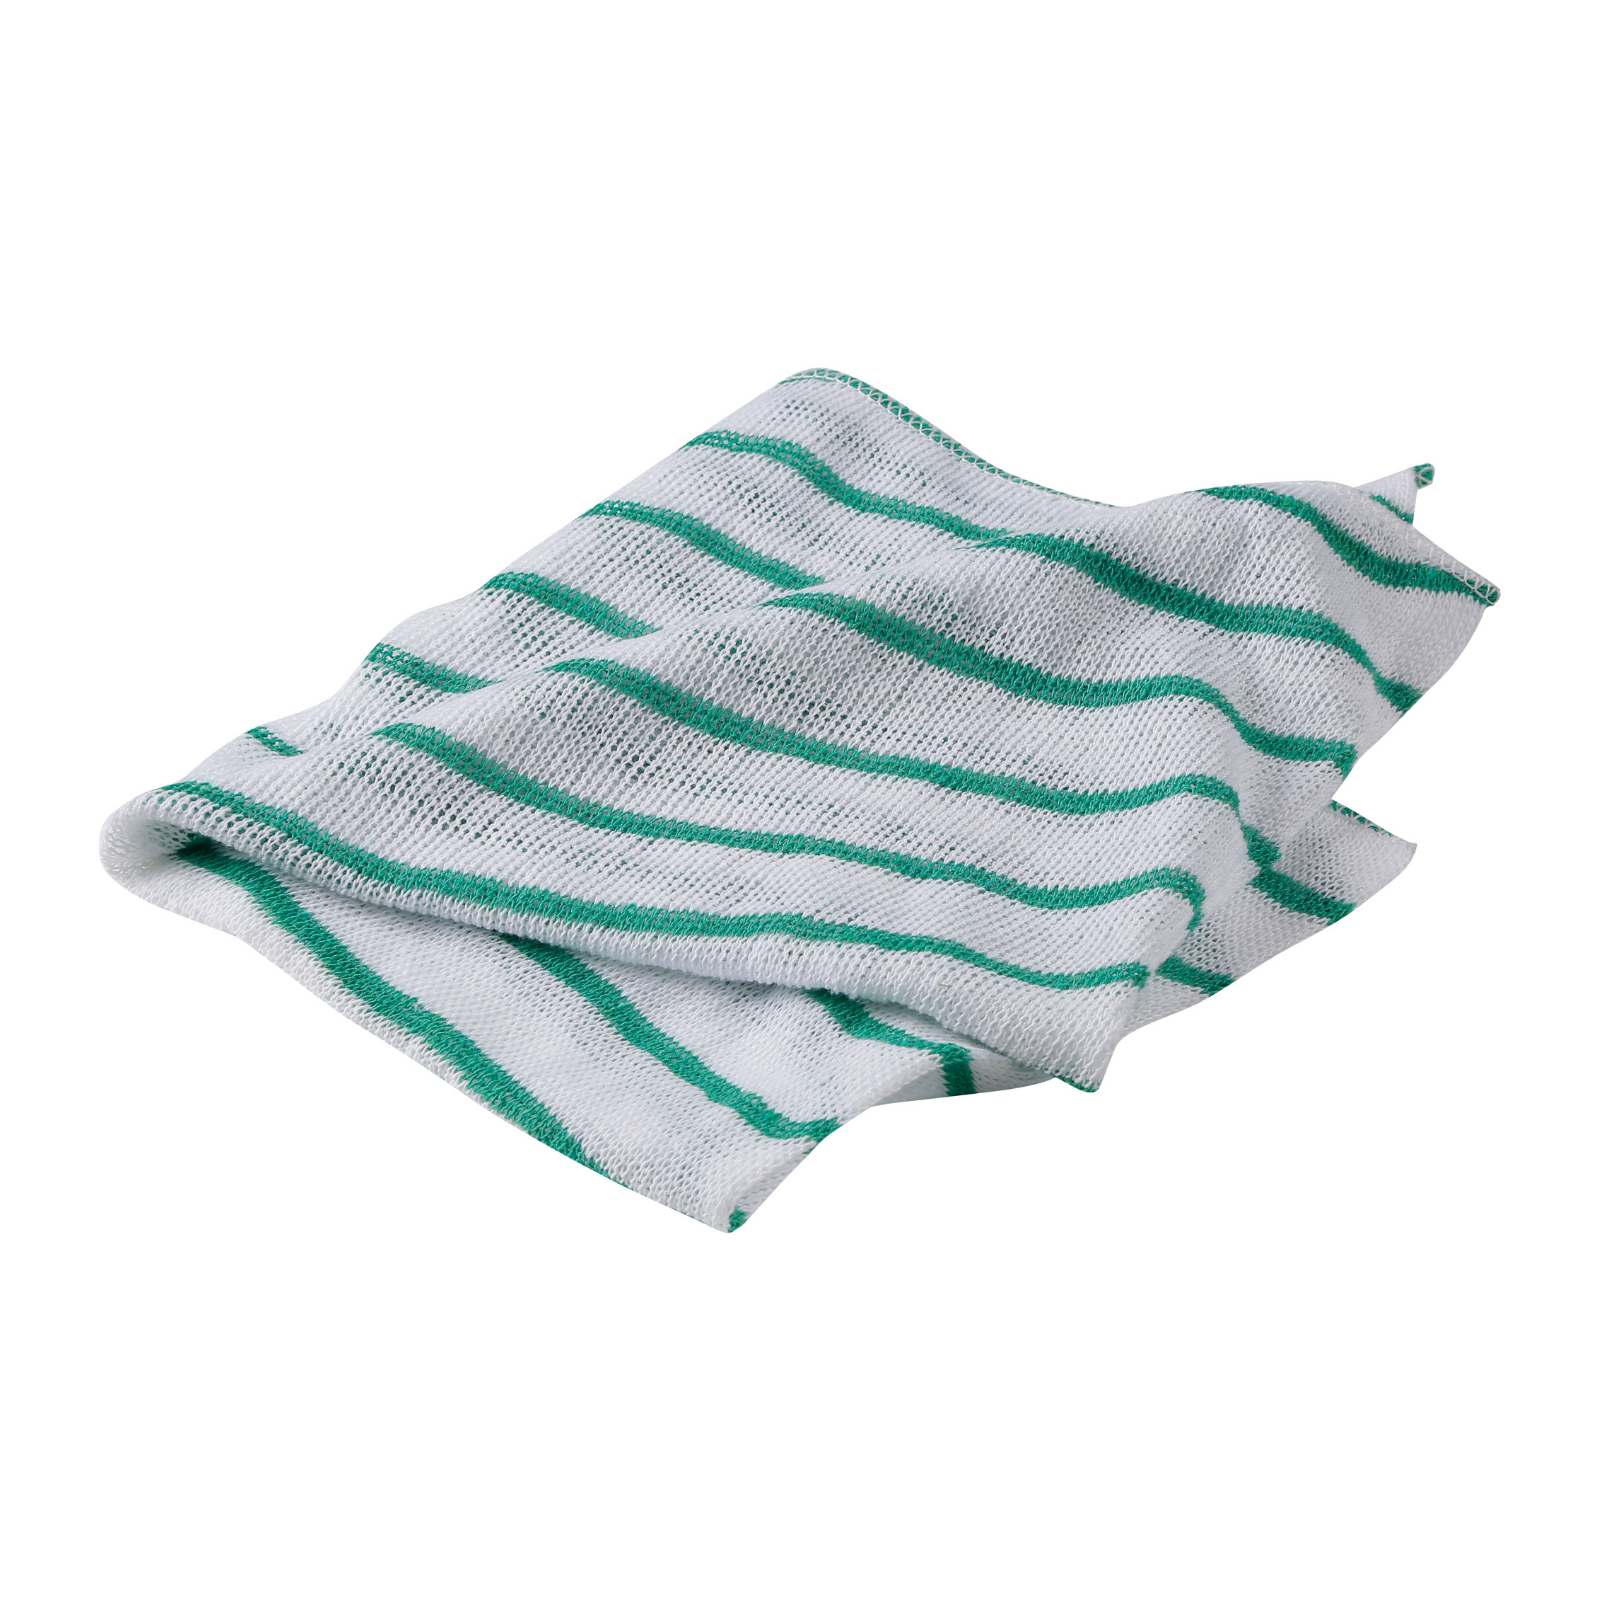 Stockinette Cleaning Cloths 45x38cm - Green Stripe